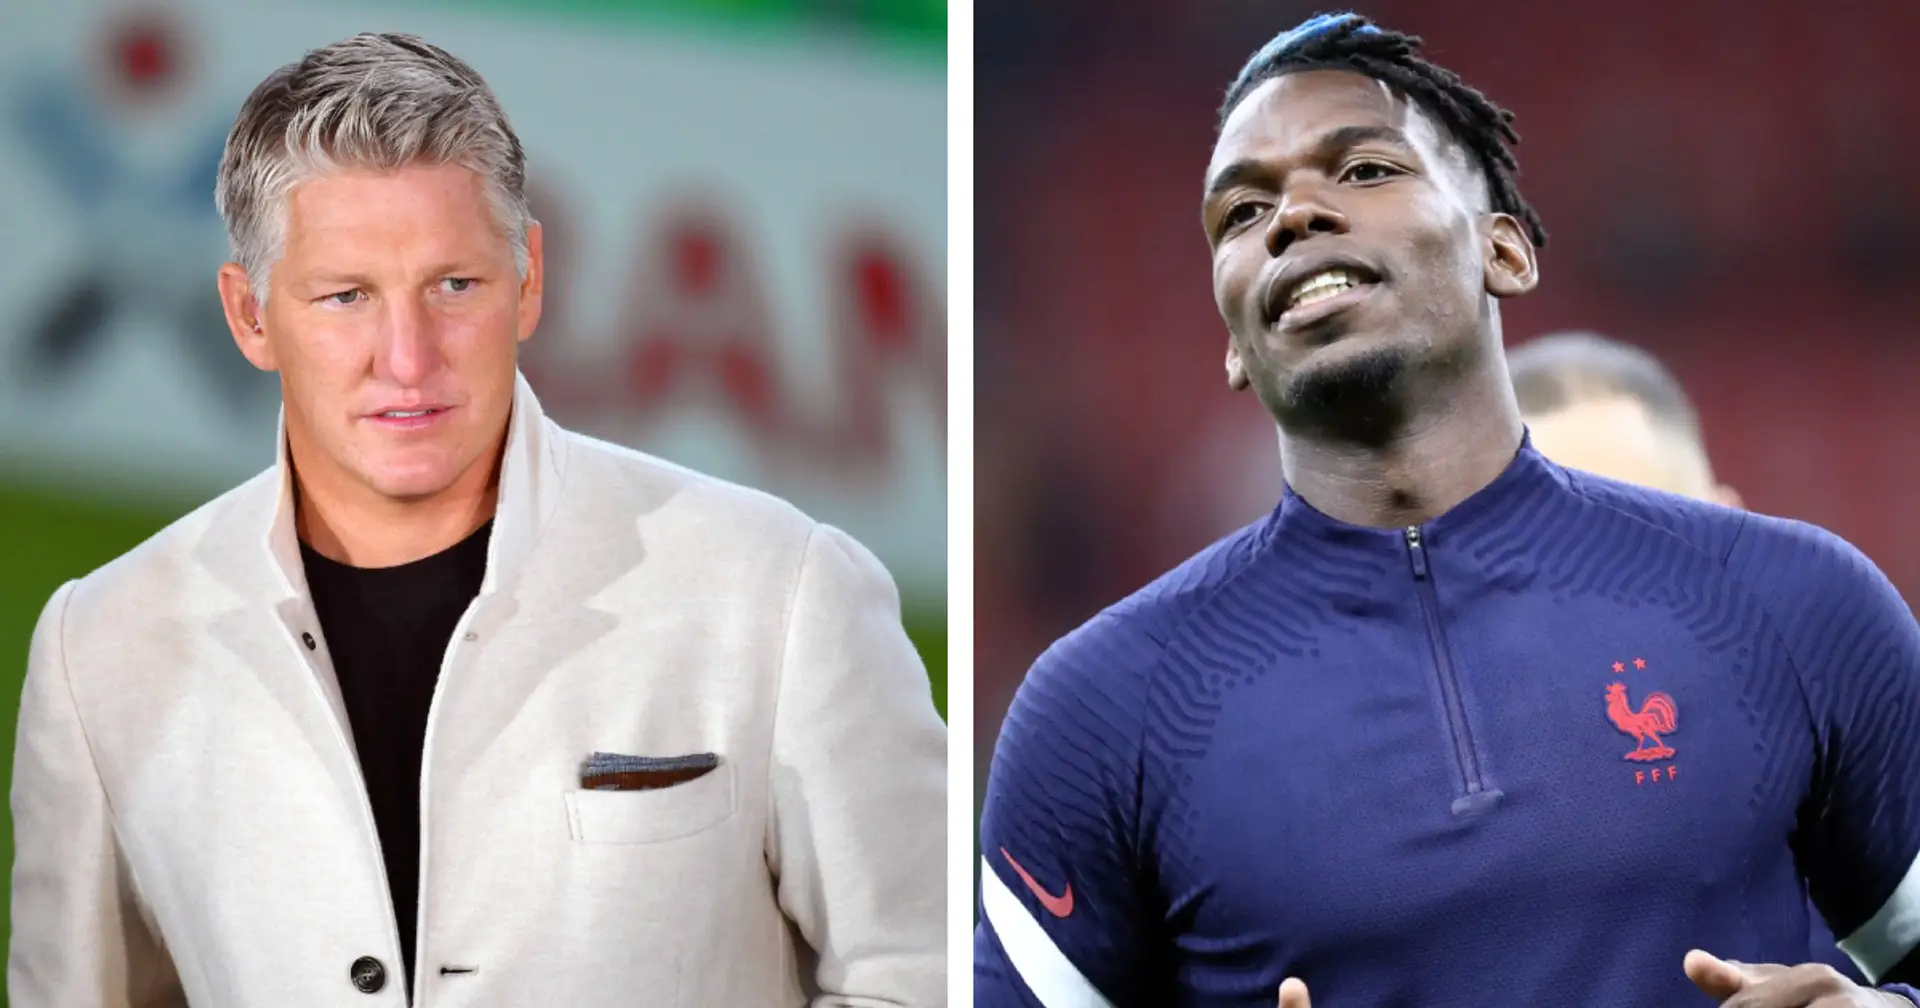 'You need to have the right teammates': Bastian Schweinsteiger explains Pogba's Man United struggles